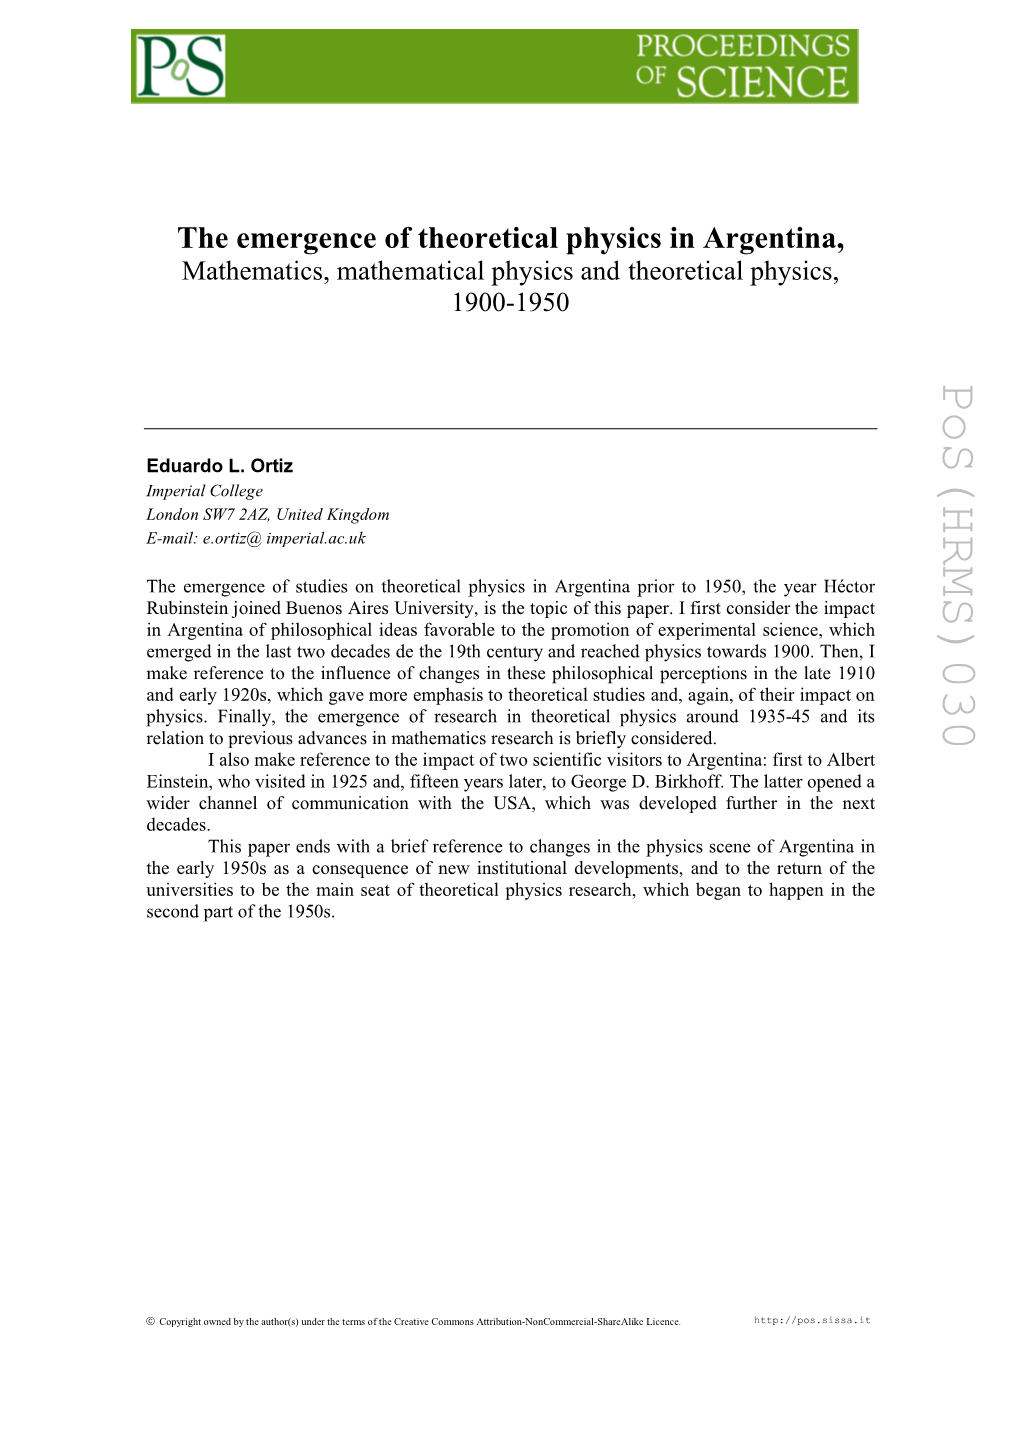 The Emergence of Theoretical Physics in Argentina